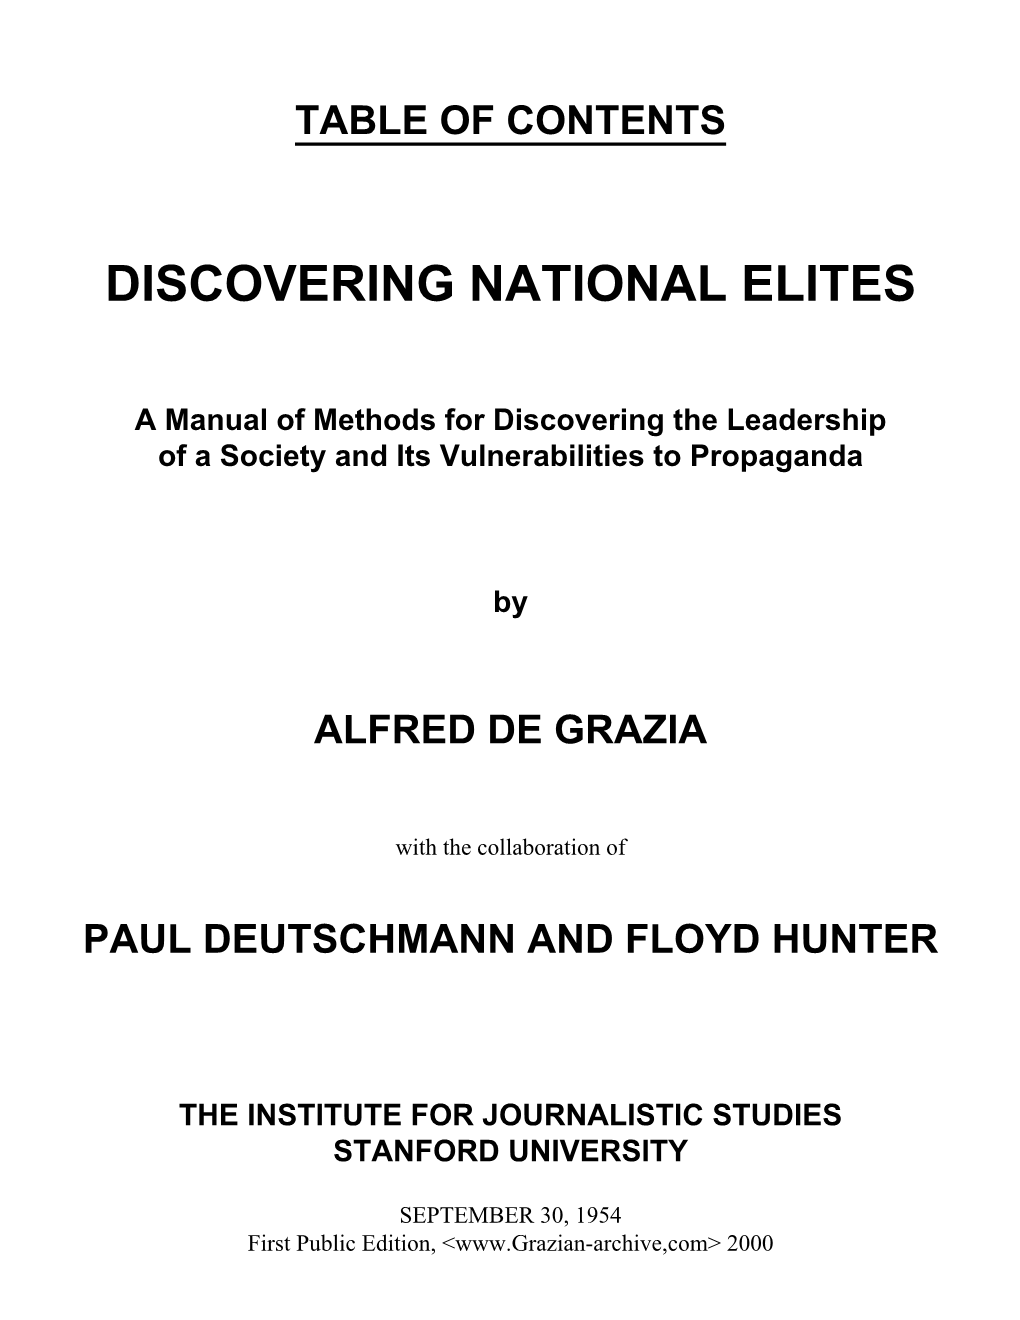 Discovering National Elites: Table of Contents